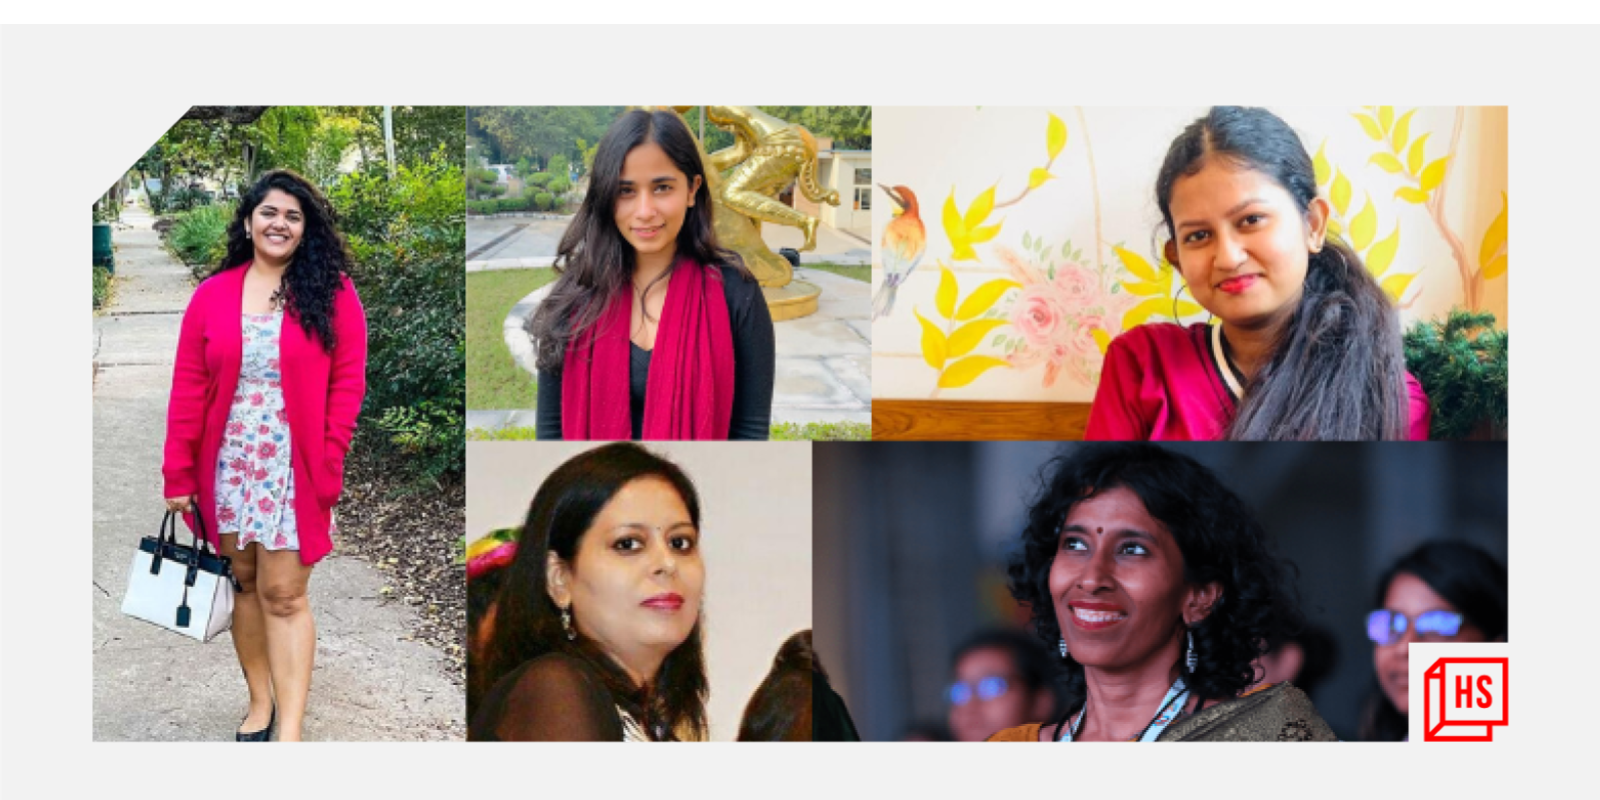 [Year in Review] Meet these Indian women who used social media to drive change and social impact
